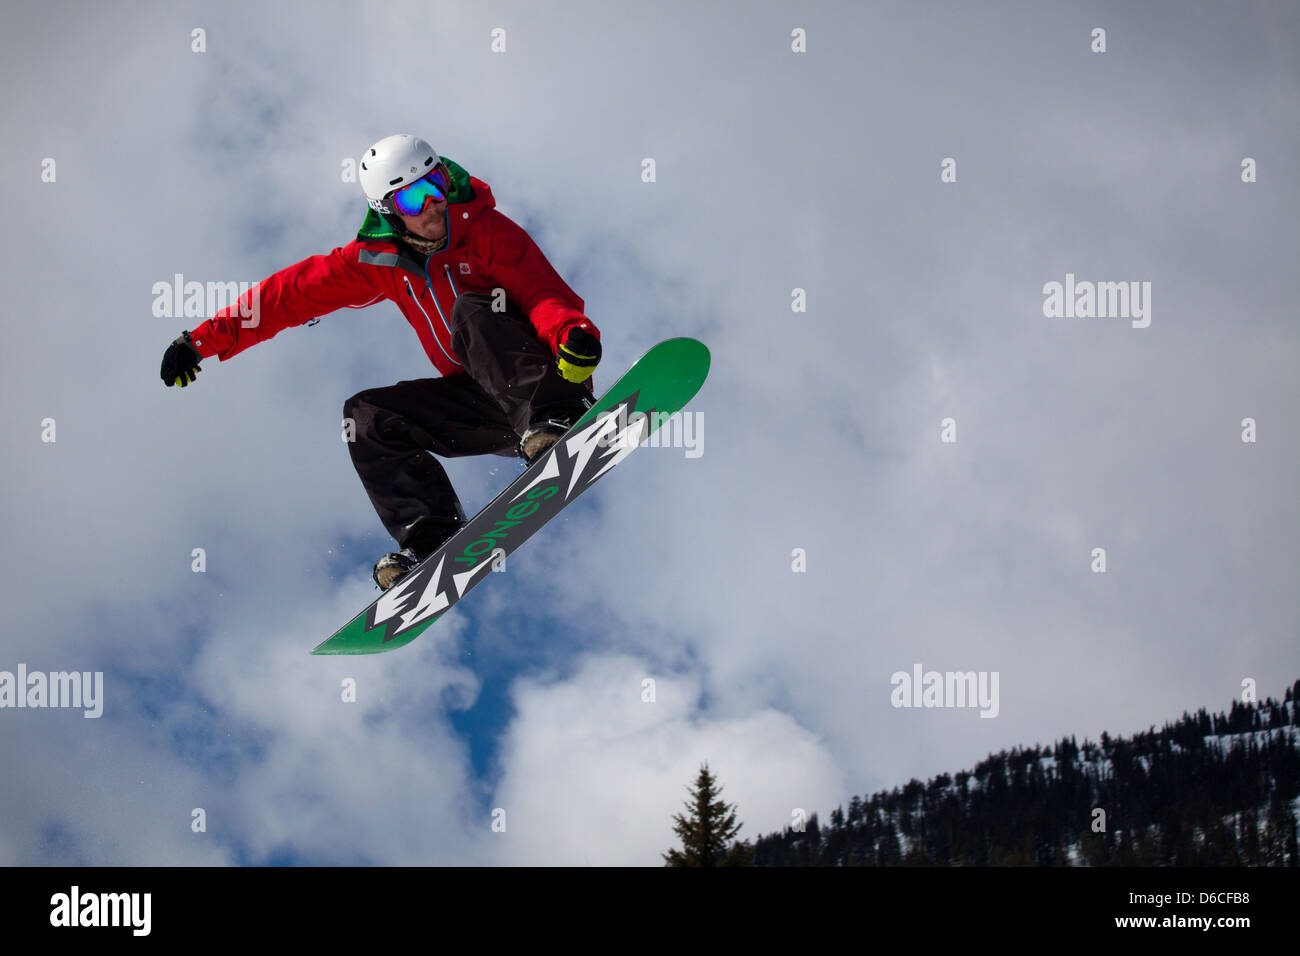 A boarder makes a jump at Red Mountain resort, Canada Stock Photo